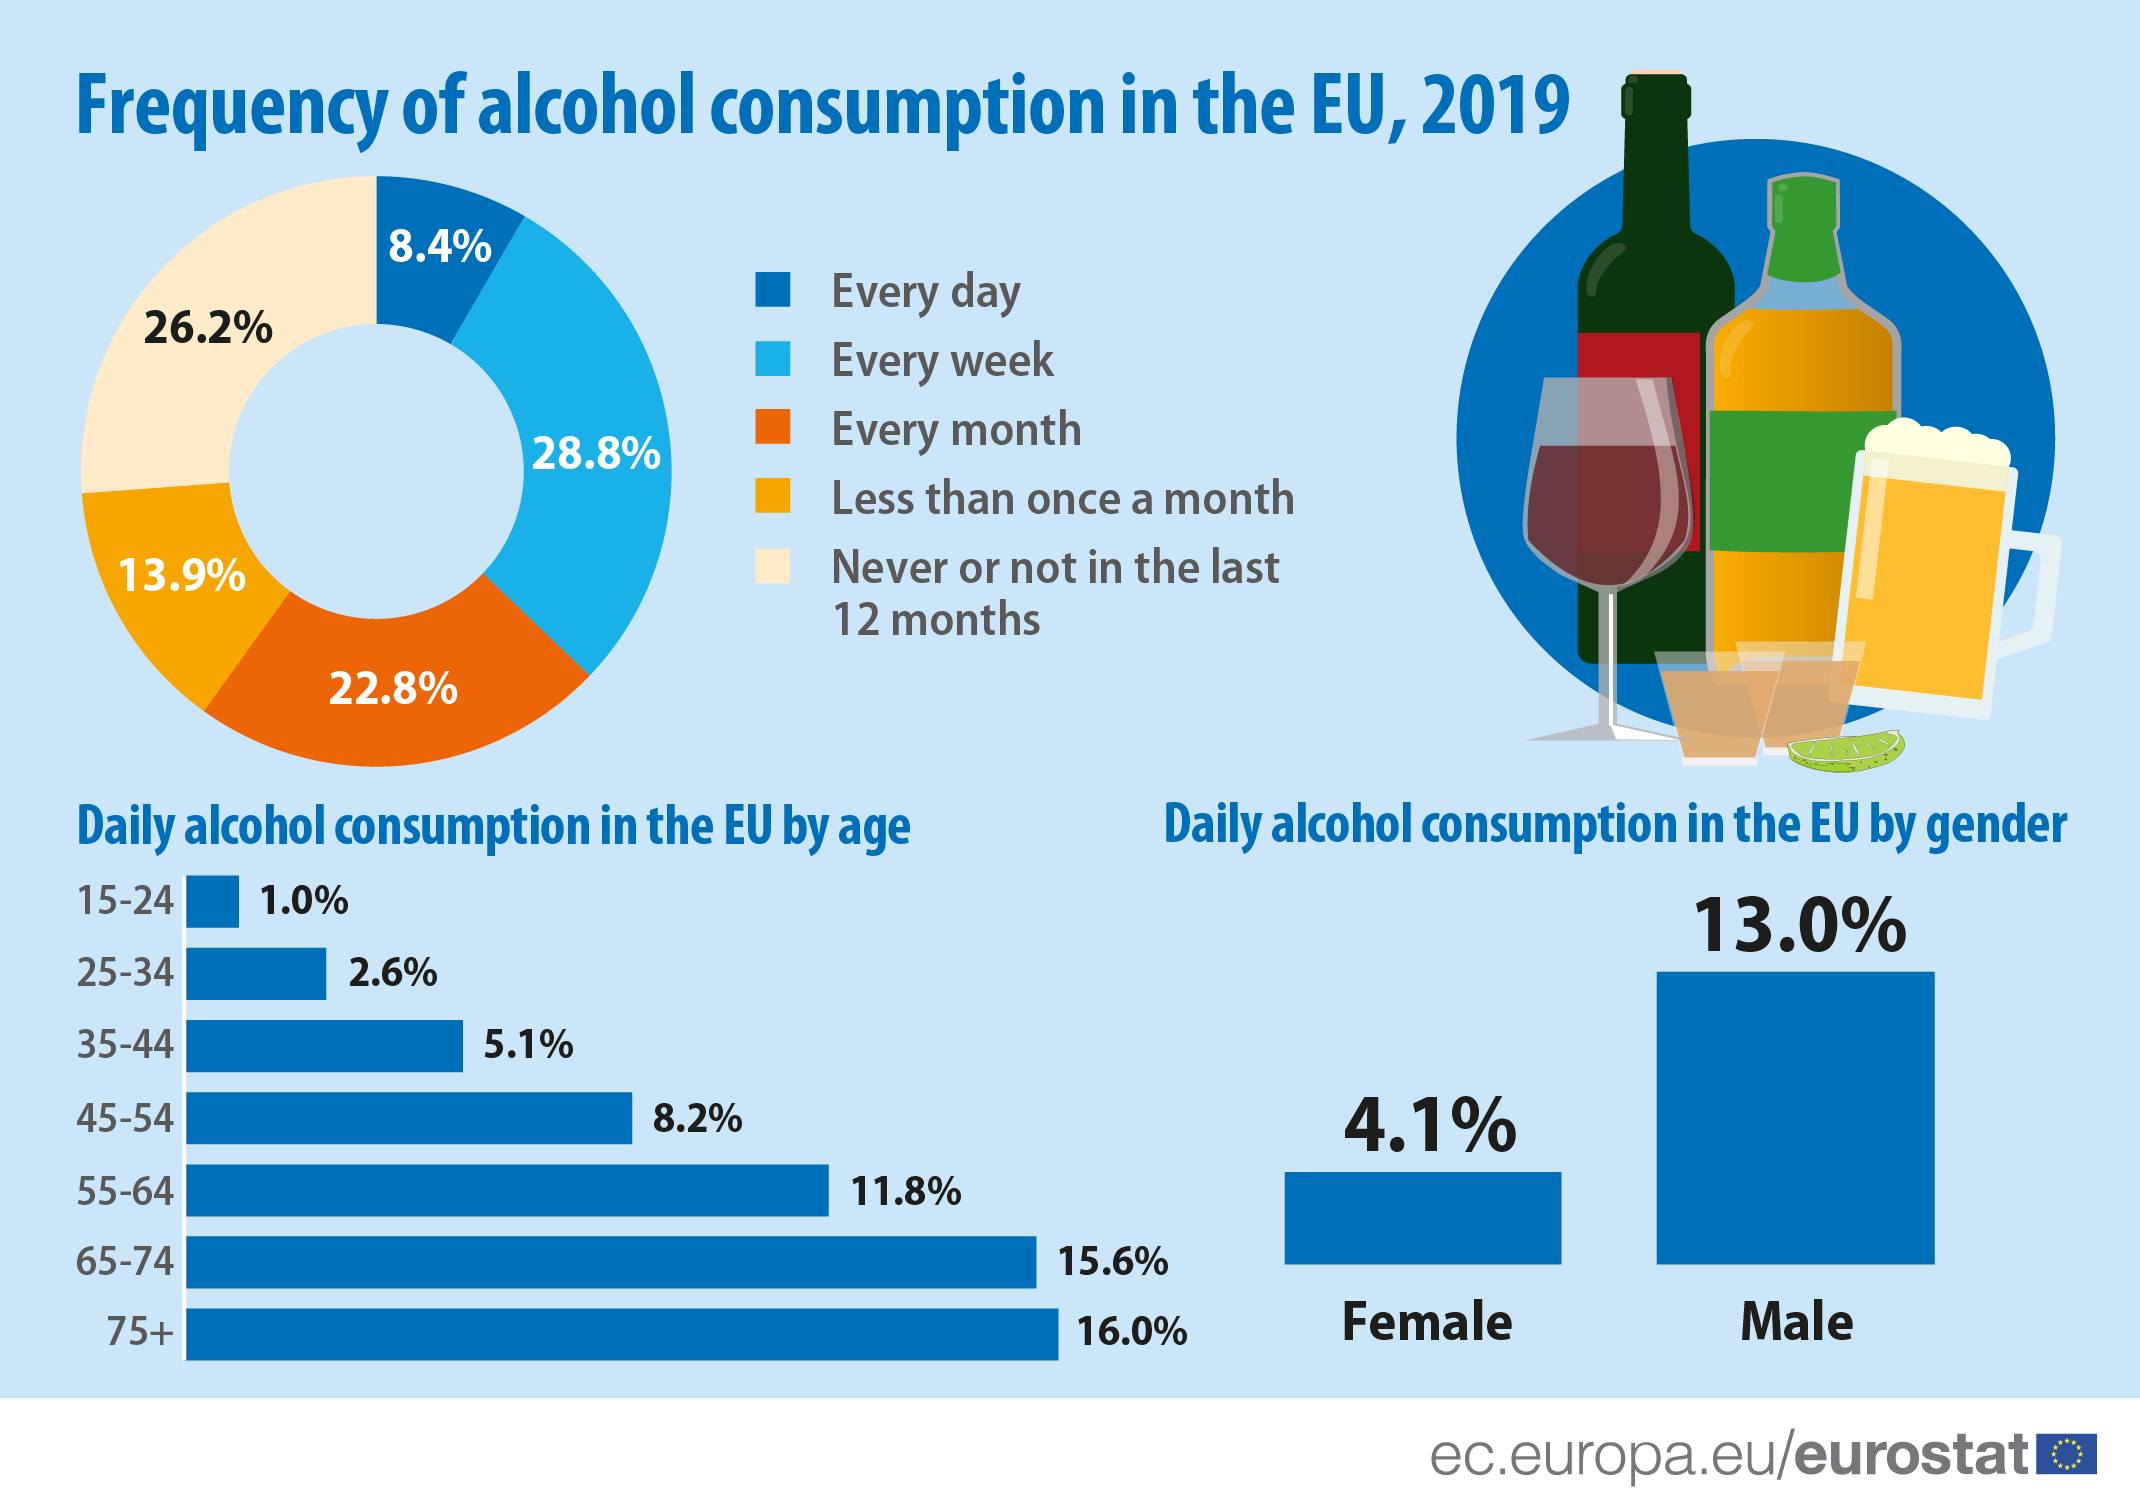 New drinks research: graphs showing frequency of alcohol consumption in the EU 2019